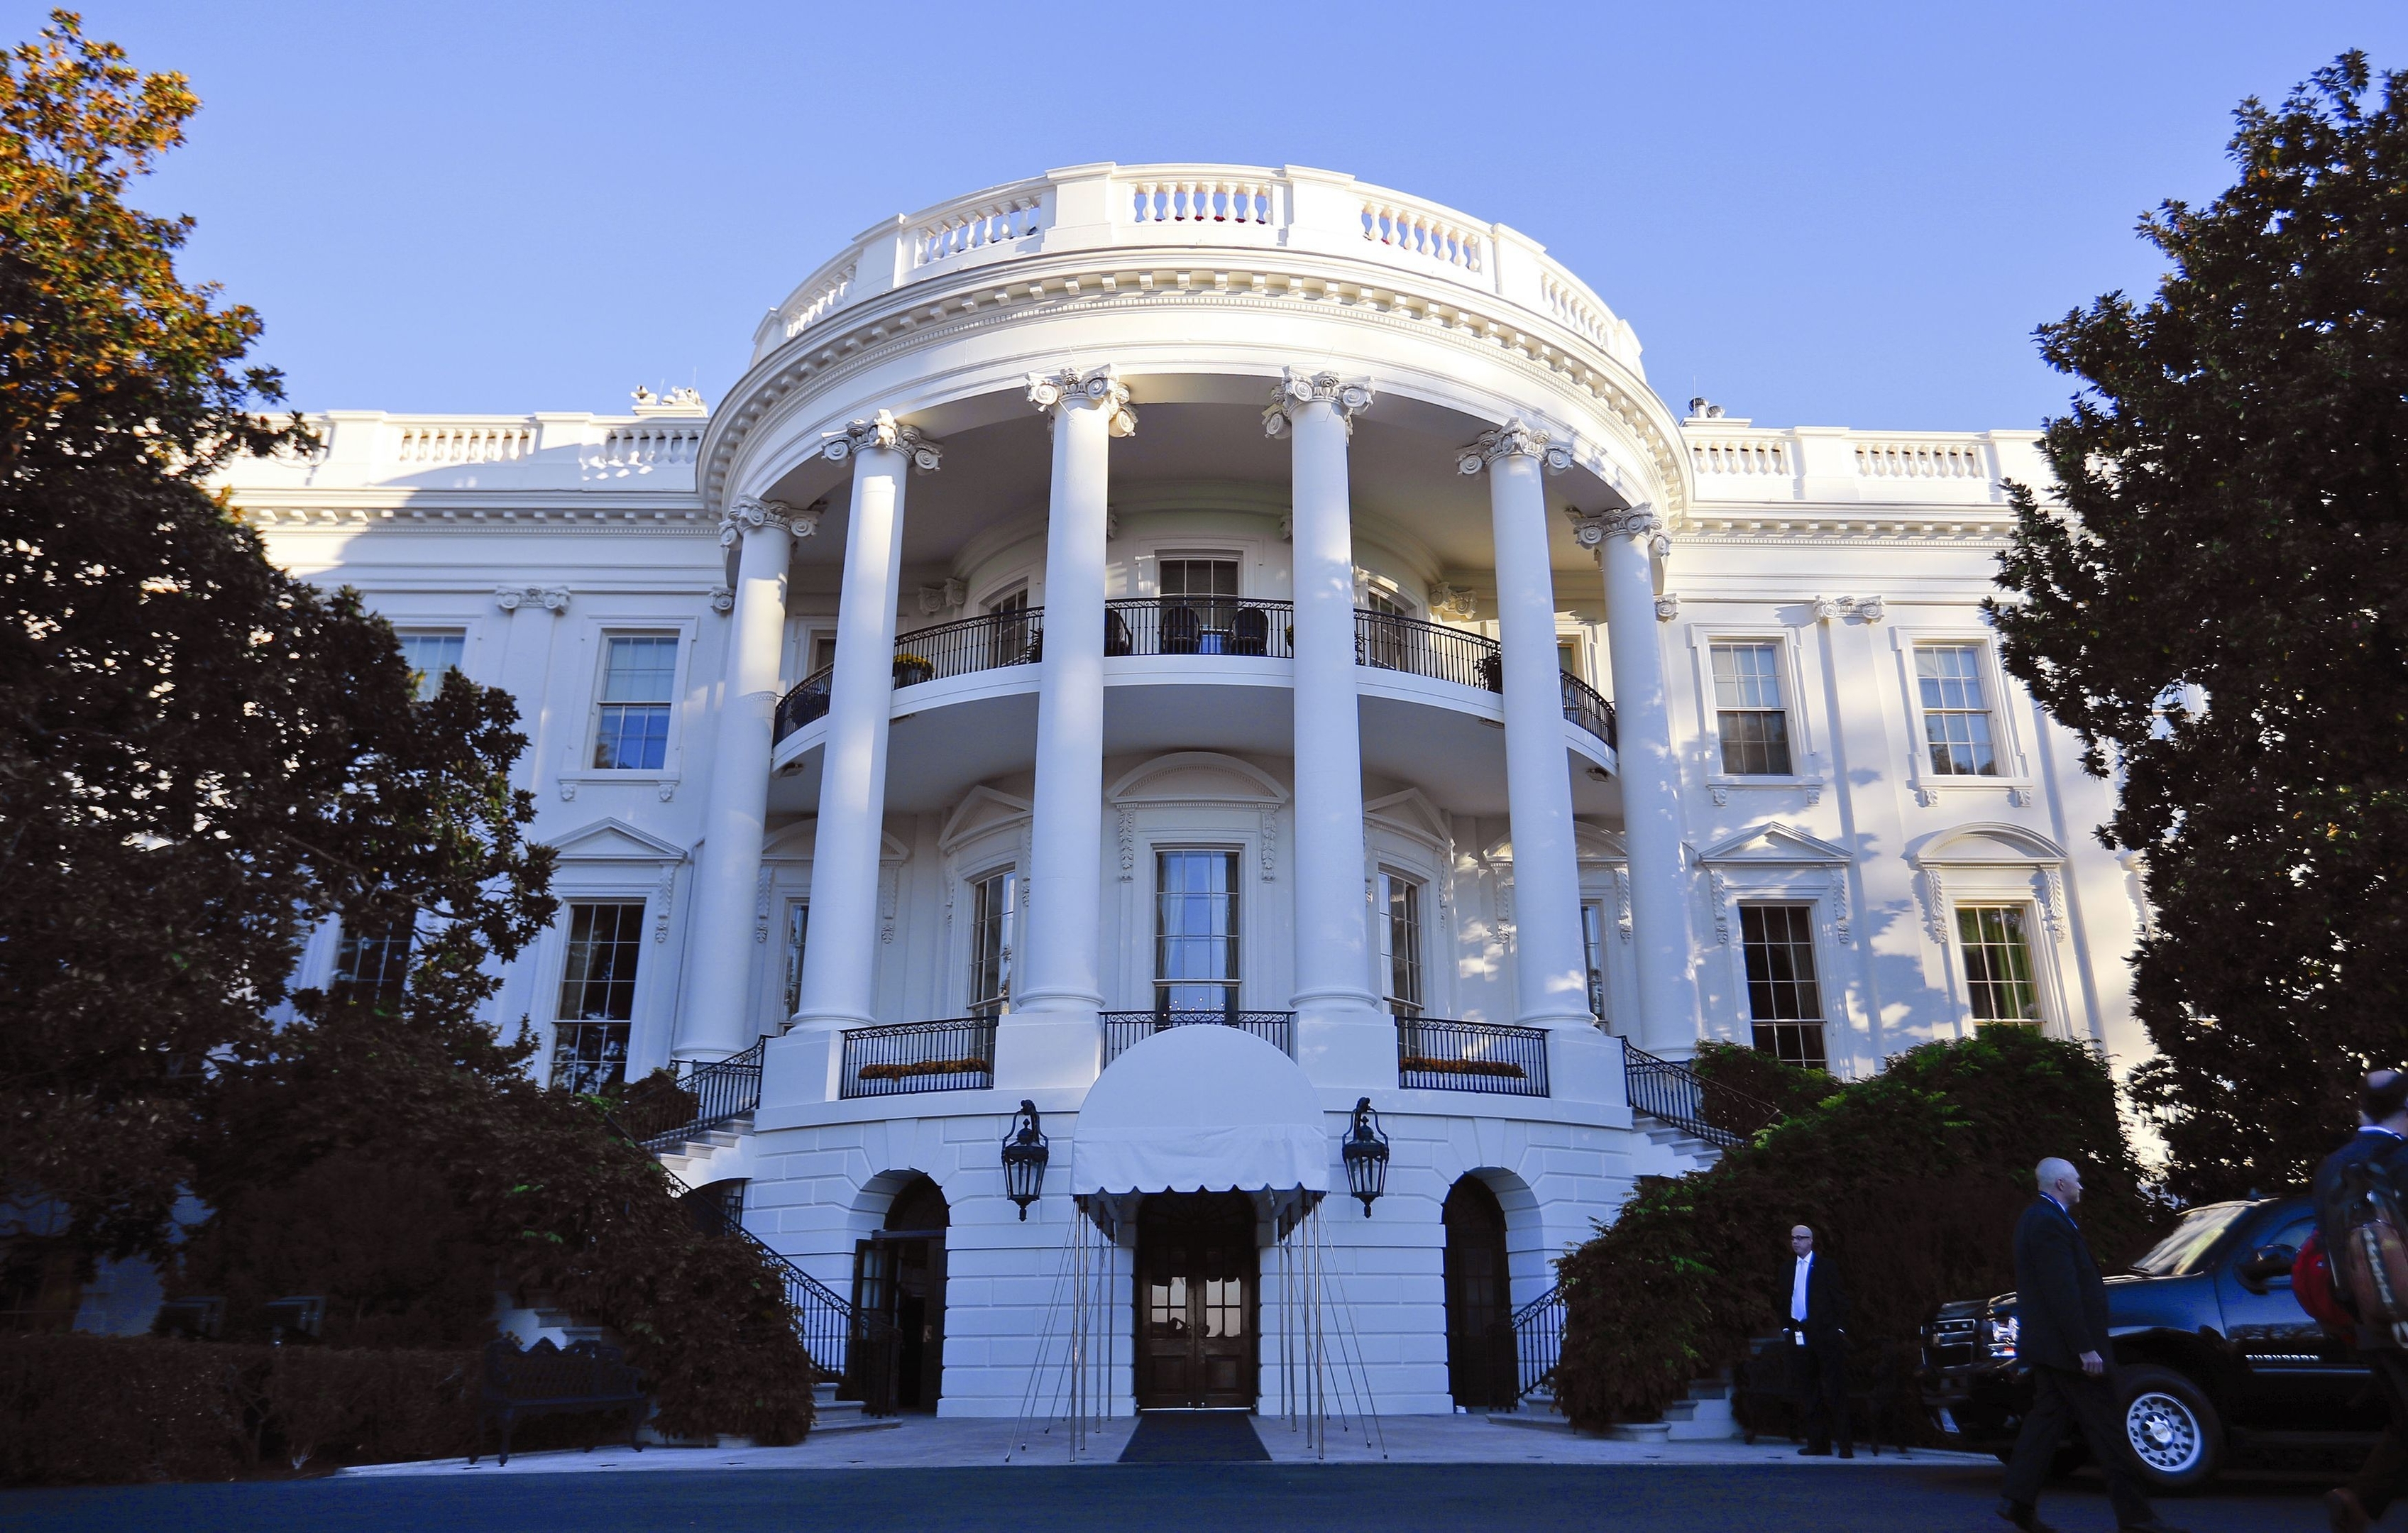 The White House as seen on Tuesday, Nov. 8, 2016 in Washington. After nearly two years of bitterness and rancor, America will elect its 45th president today, making Hillary Clinton the nation's first female commander in chief or choosing billionaire businessman Donald Trump, whose volatile campaign has upended U.S. politics. (AP Photo/Pablo Martinez Monsivais)